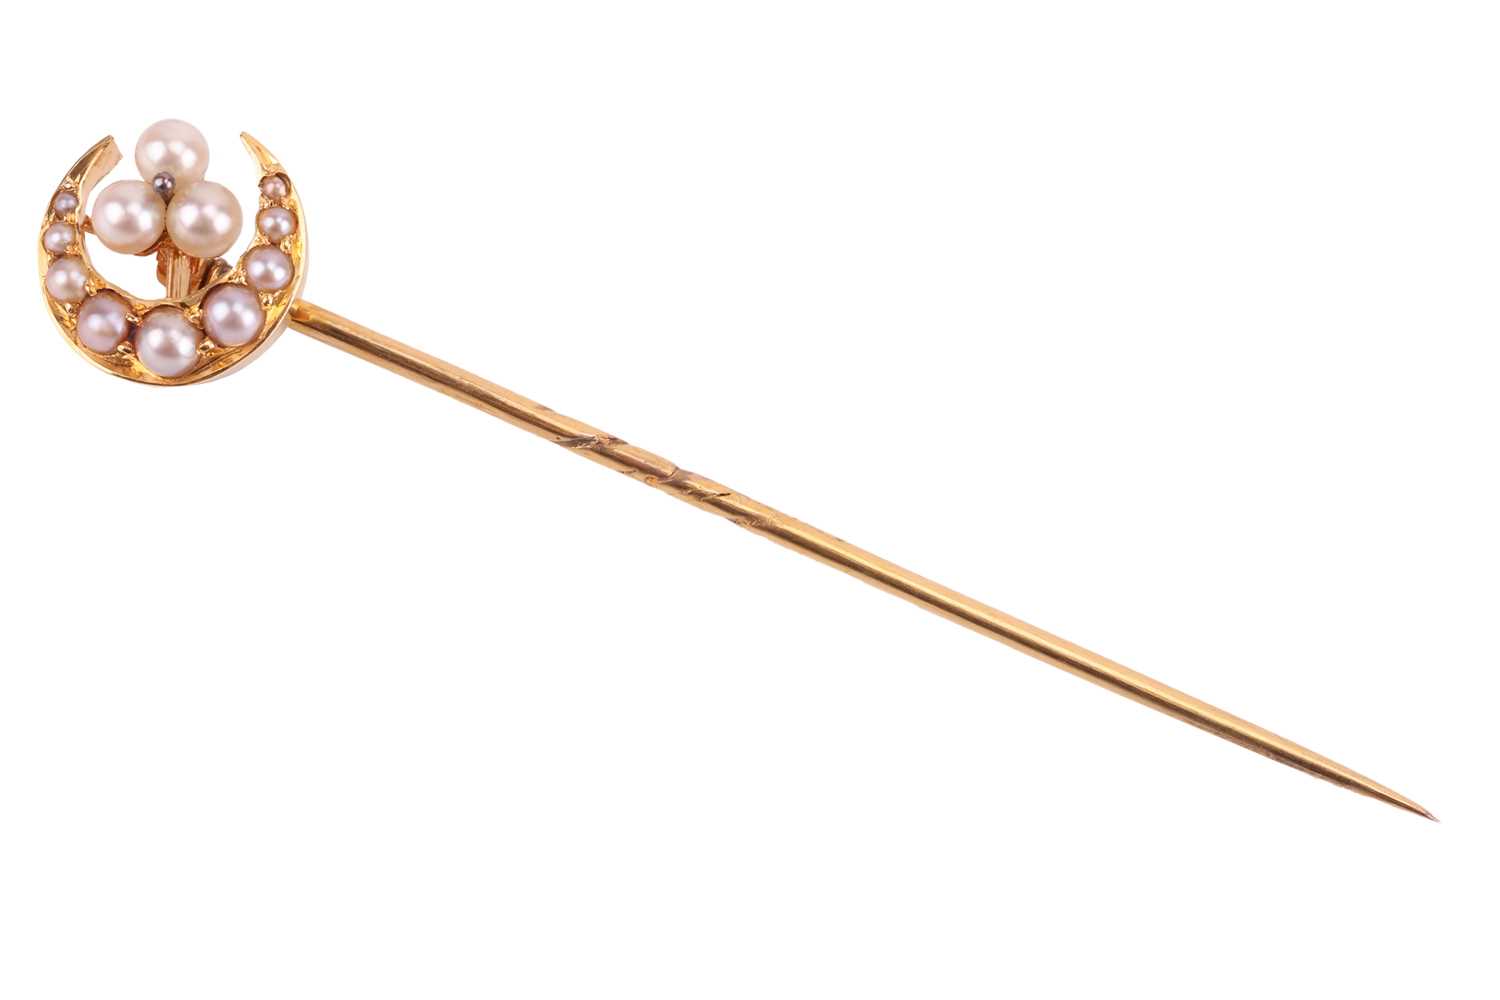 A seed pearl crescent stick pin, the crescent measuring 11mm diameter, with a seed pearl trefoil clu